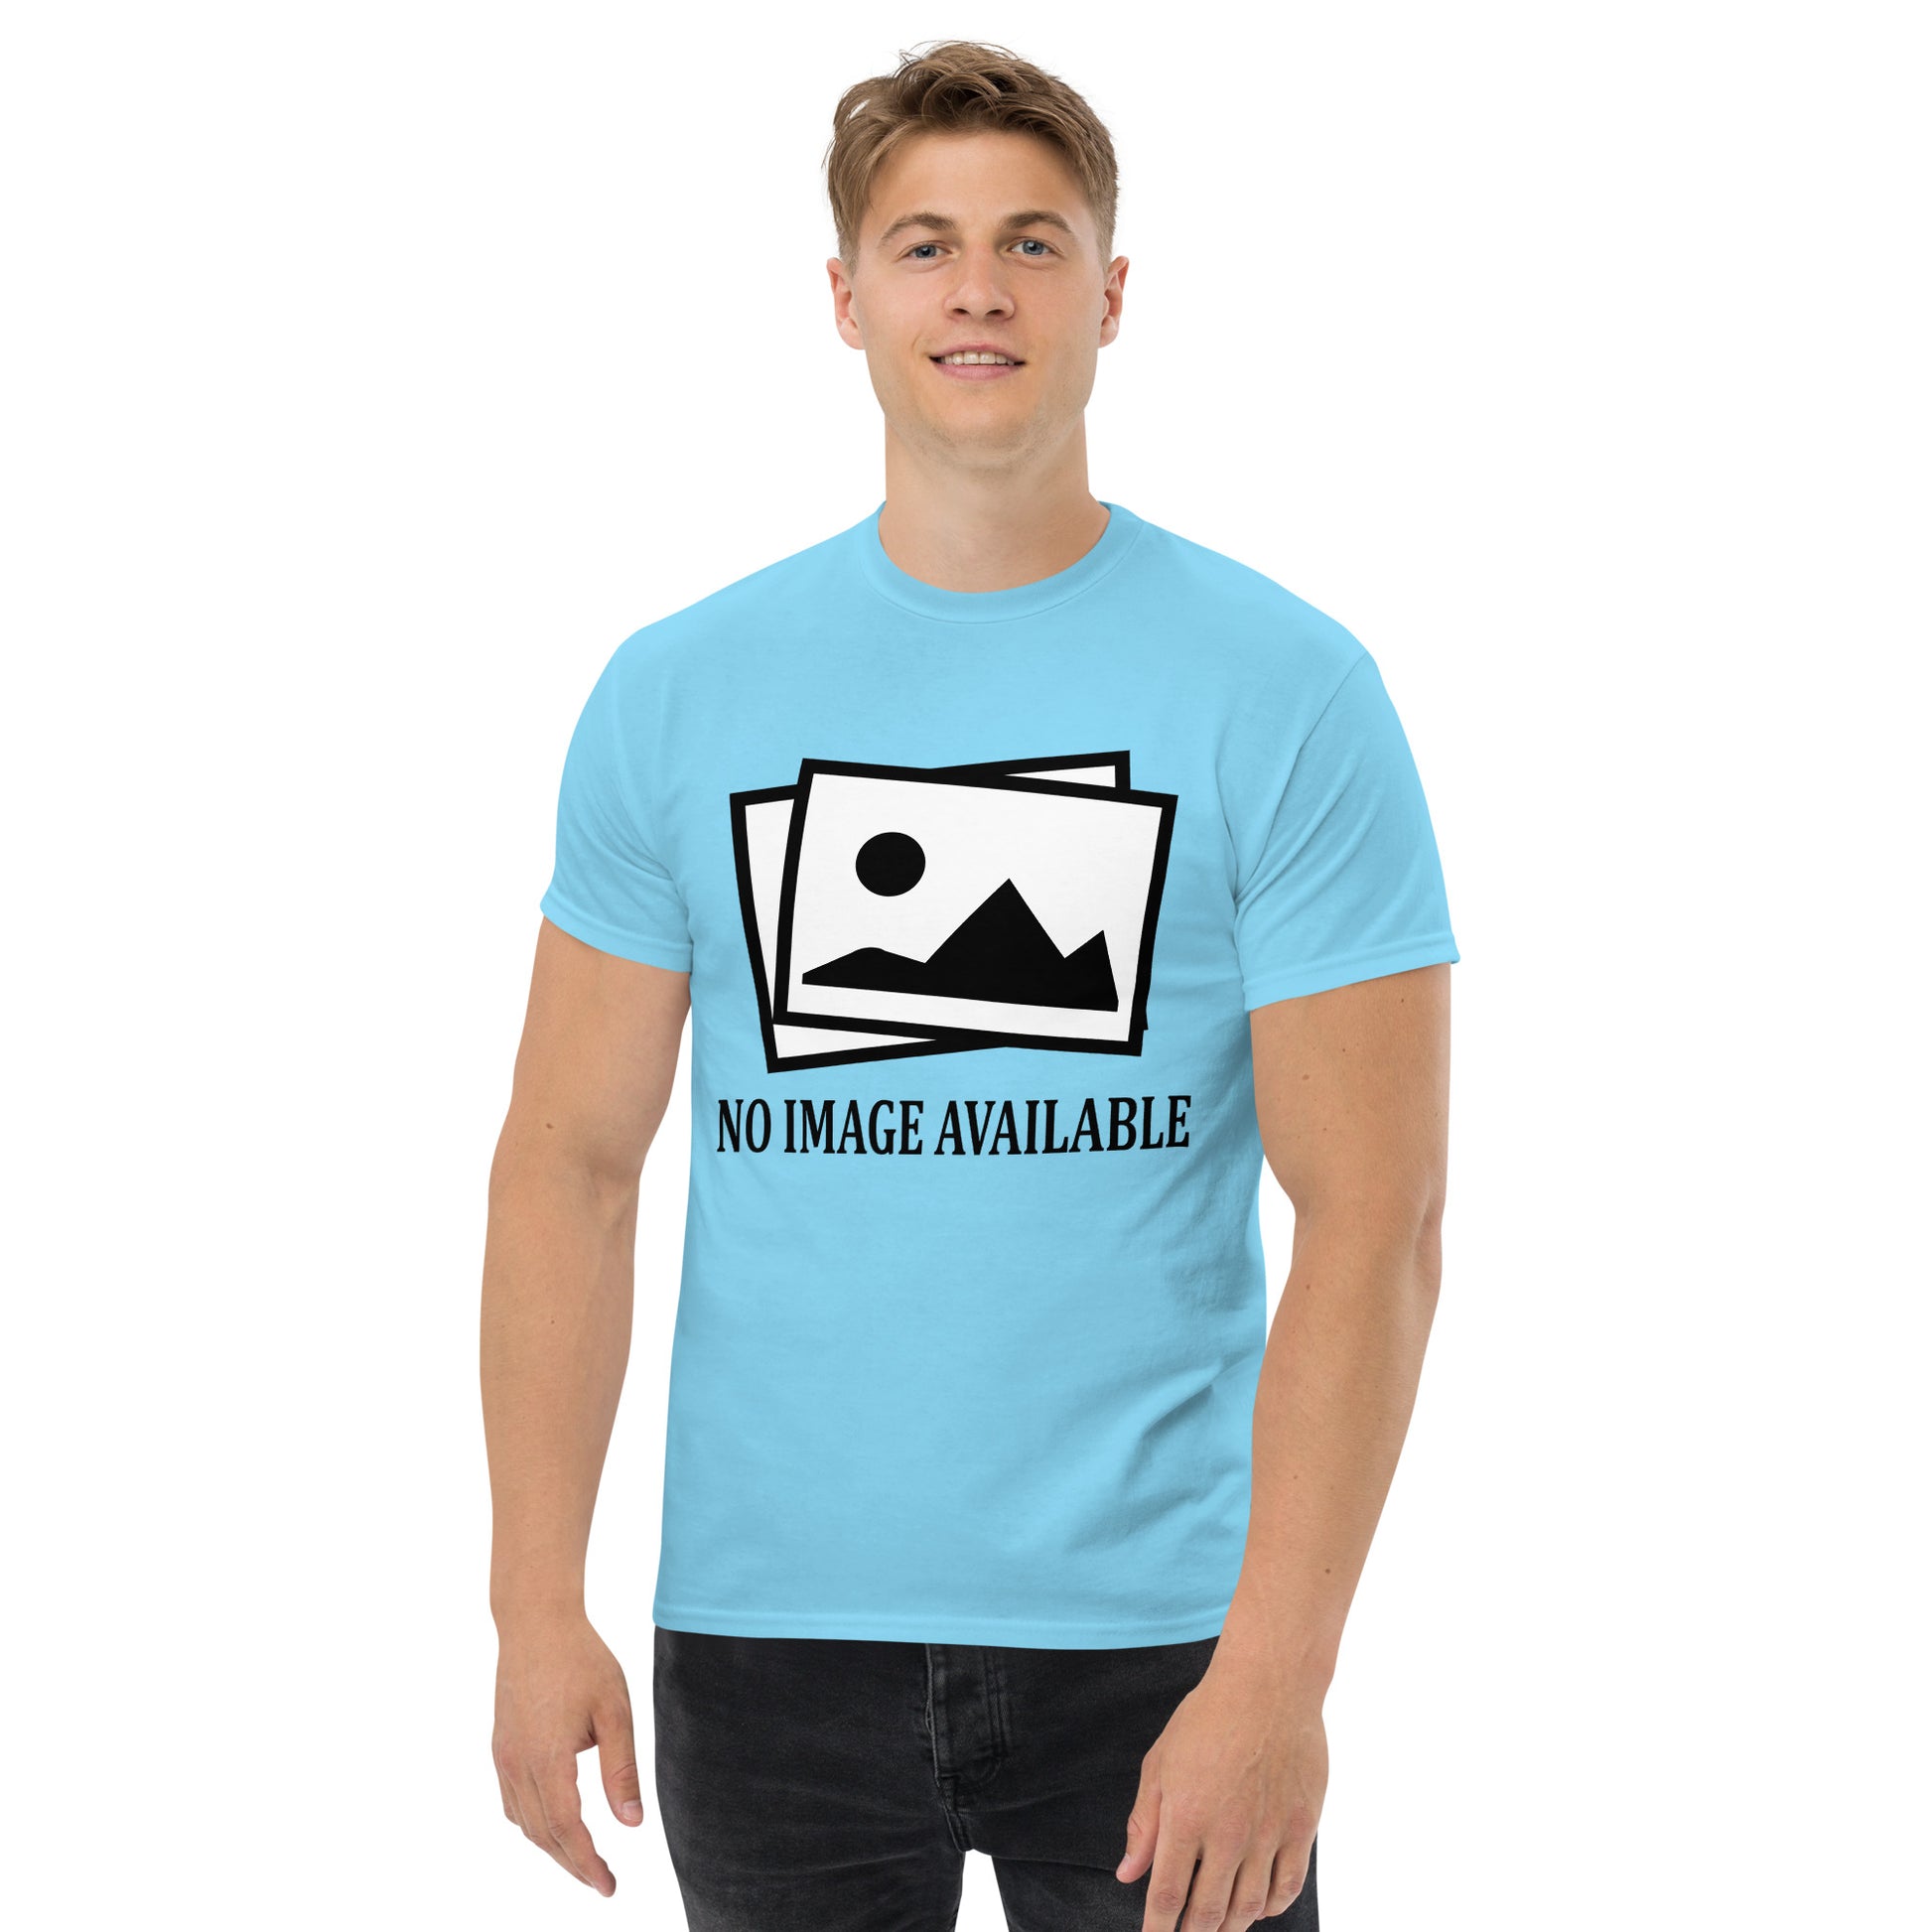 Men with sky blue t-shirt with image and text "no image available"